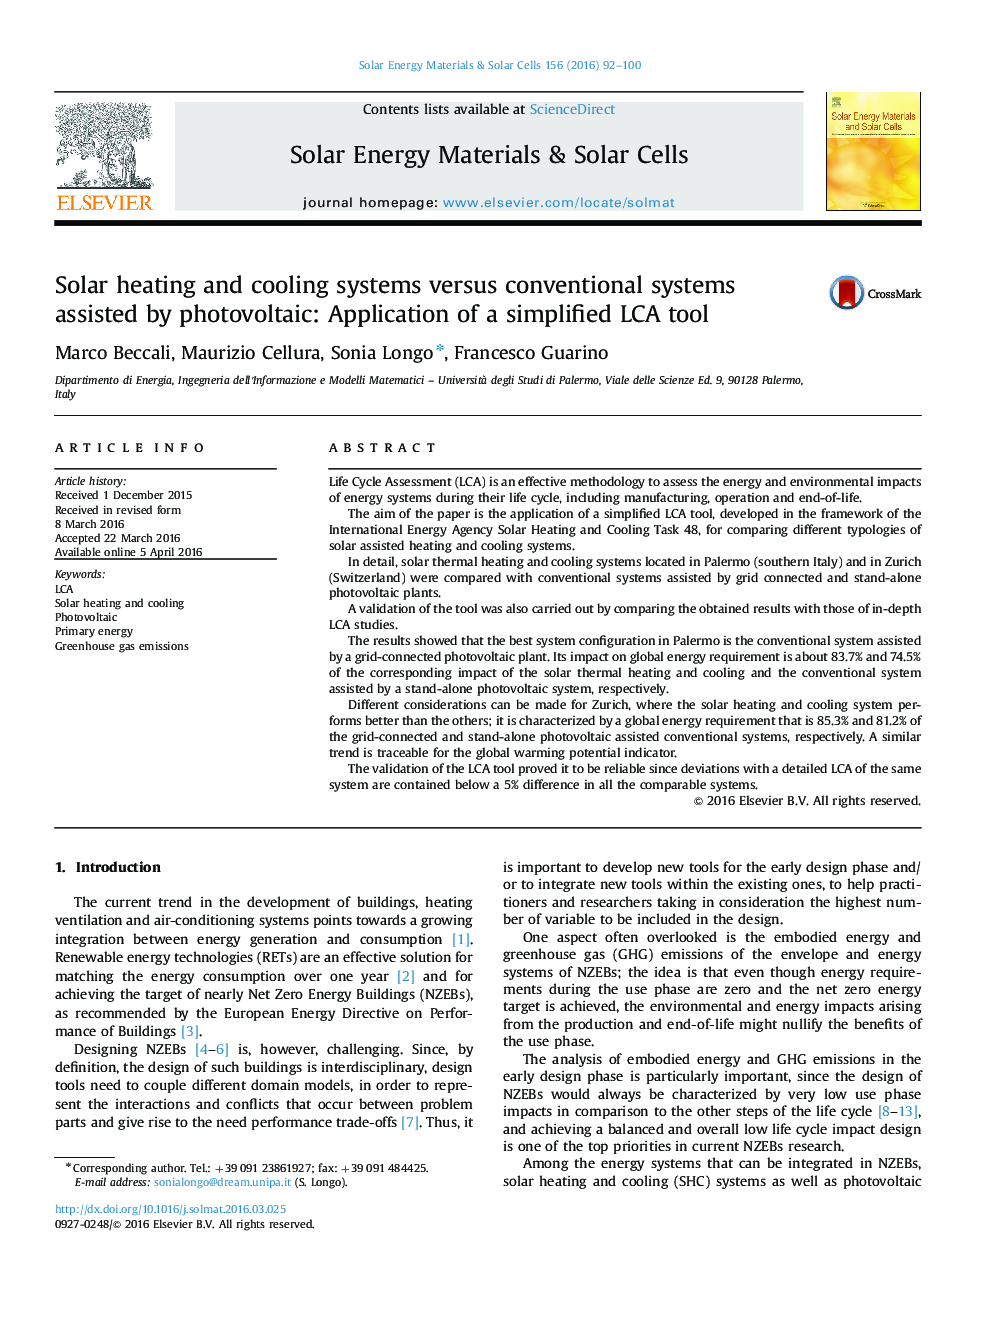 Solar heating and cooling systems versus conventional systems assisted by photovoltaic: Application of a simplified LCA tool